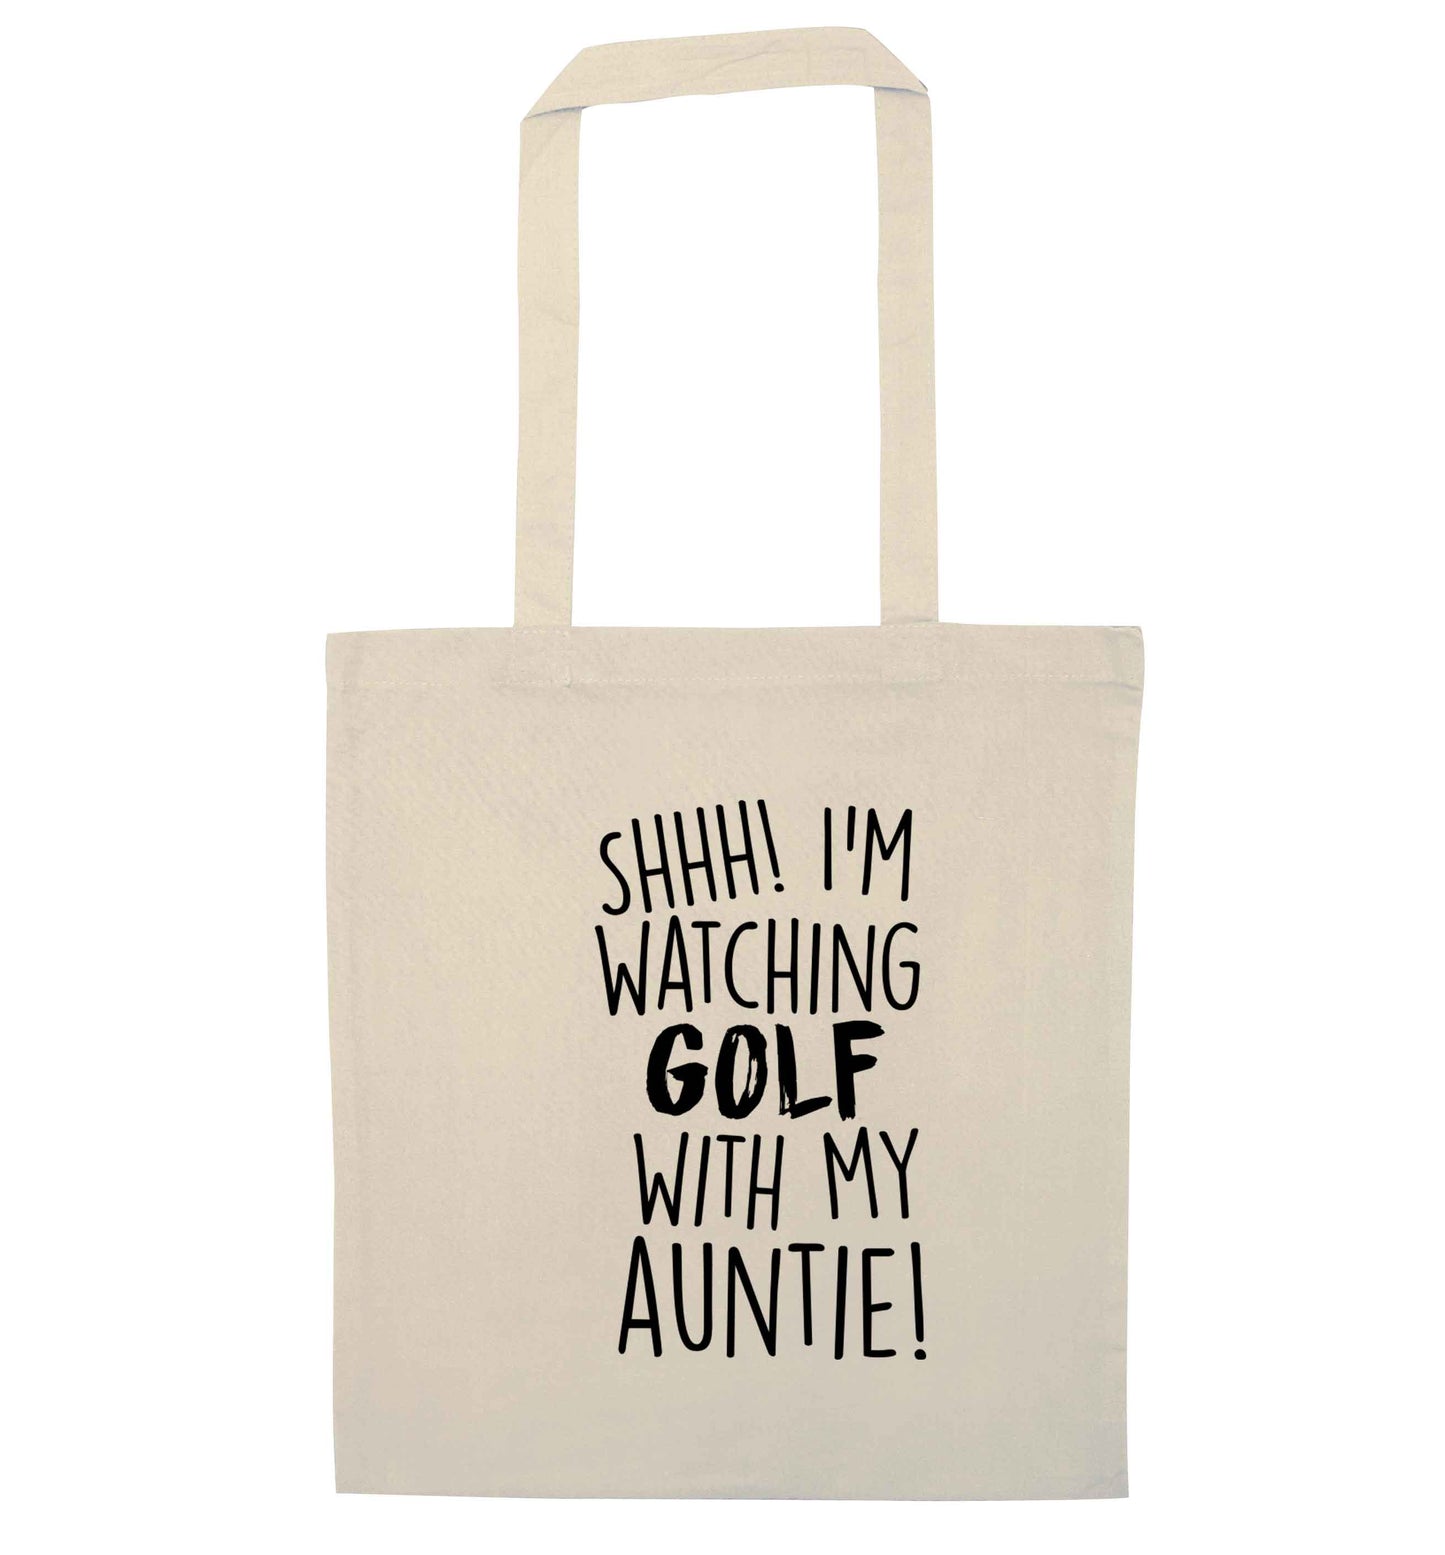 Shh I'm watching golf with my auntie natural tote bag